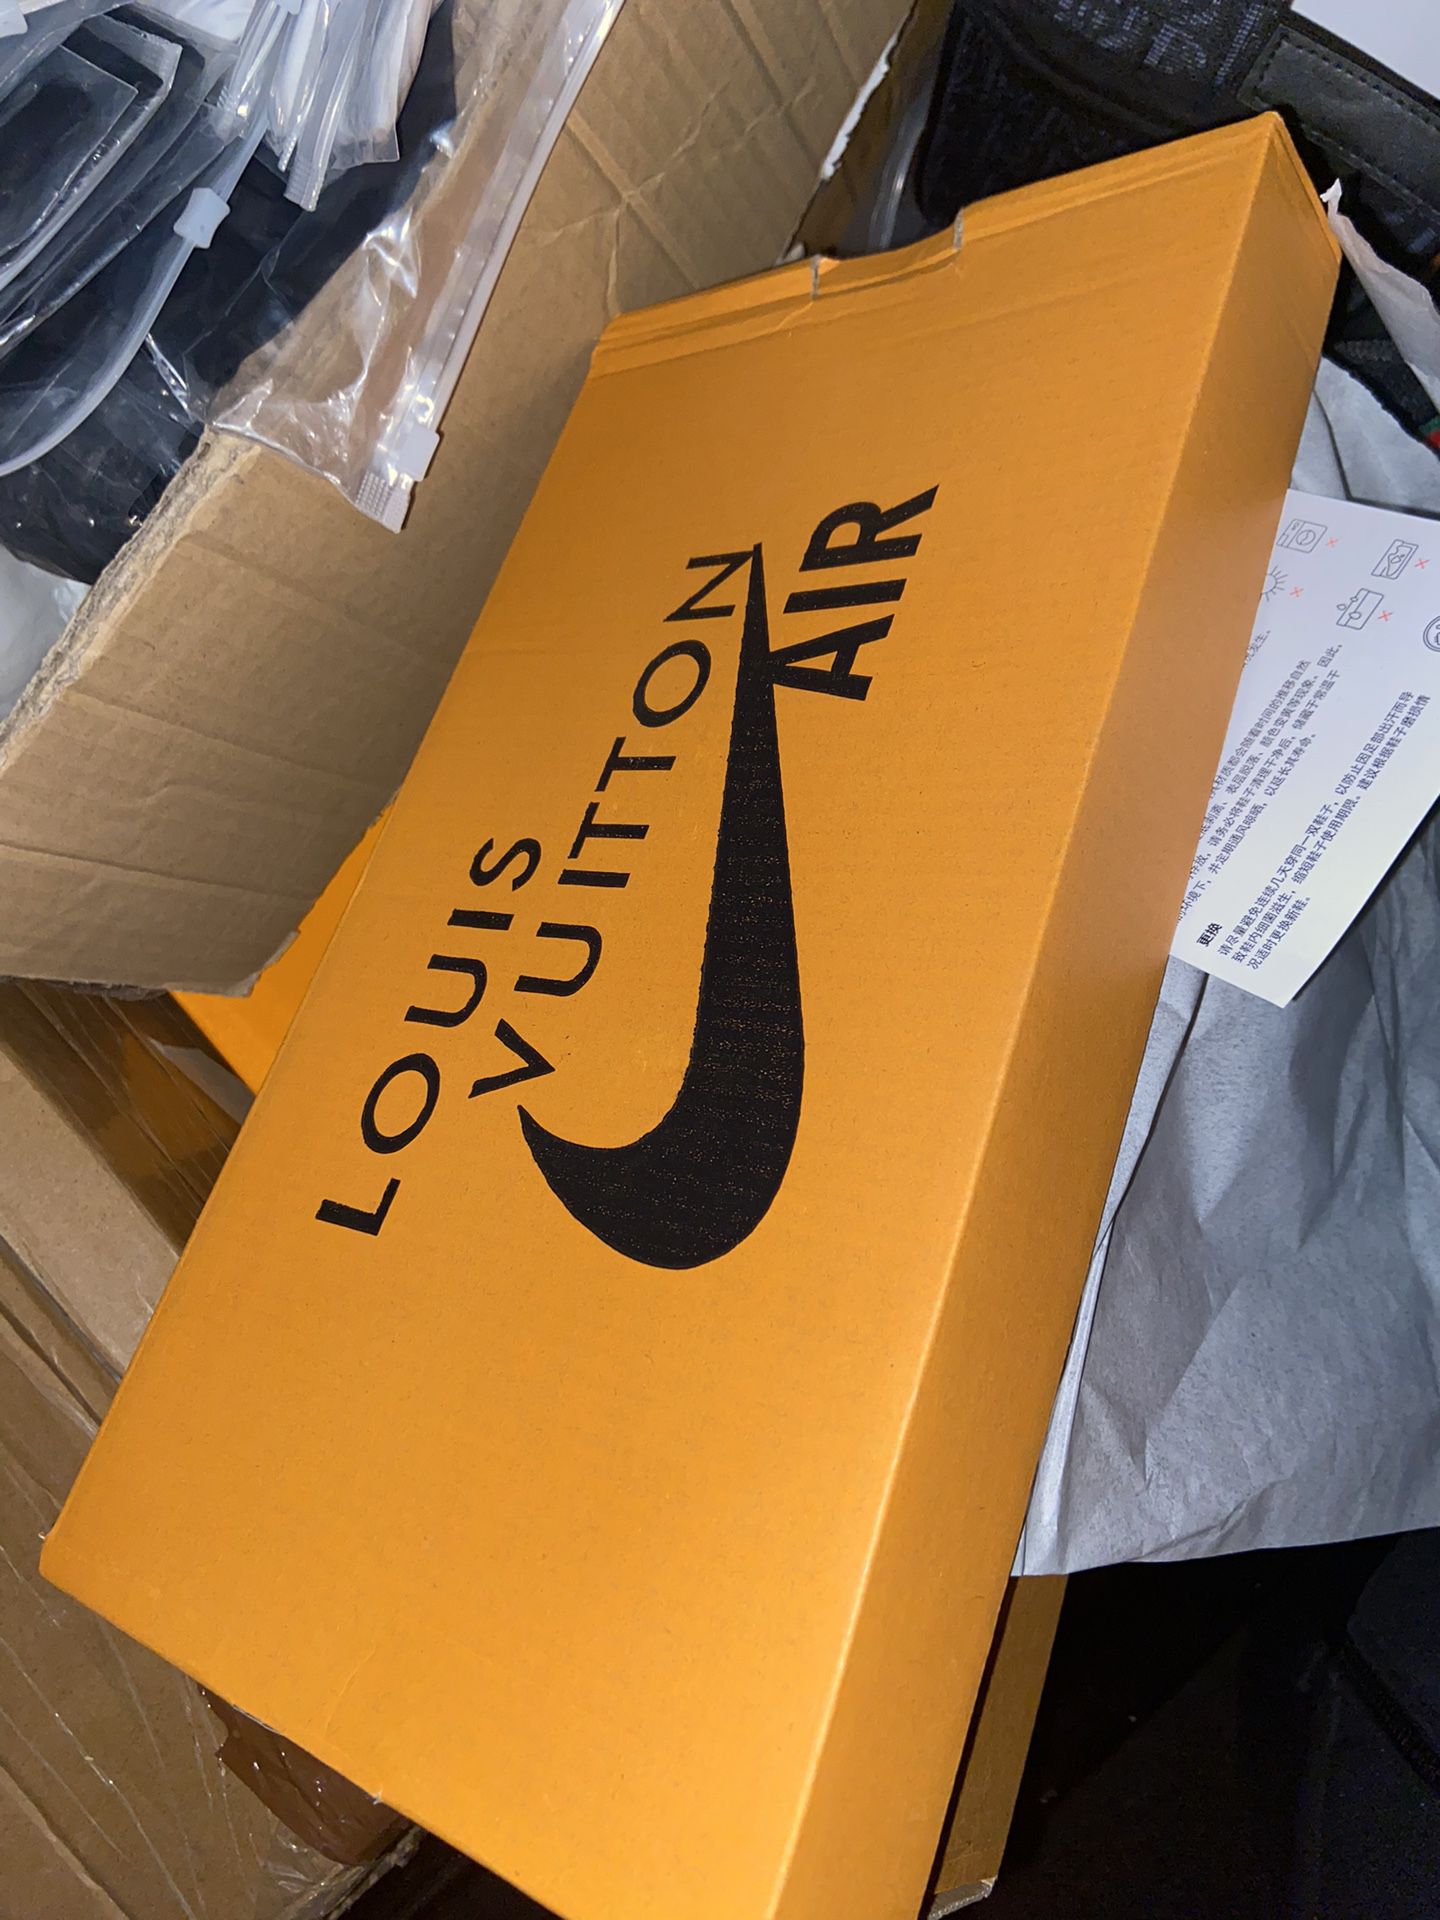 Nike Air Force 1 Blue X Louis Vuitton Size 10 Men for Sale in Burbank, CA -  OfferUp